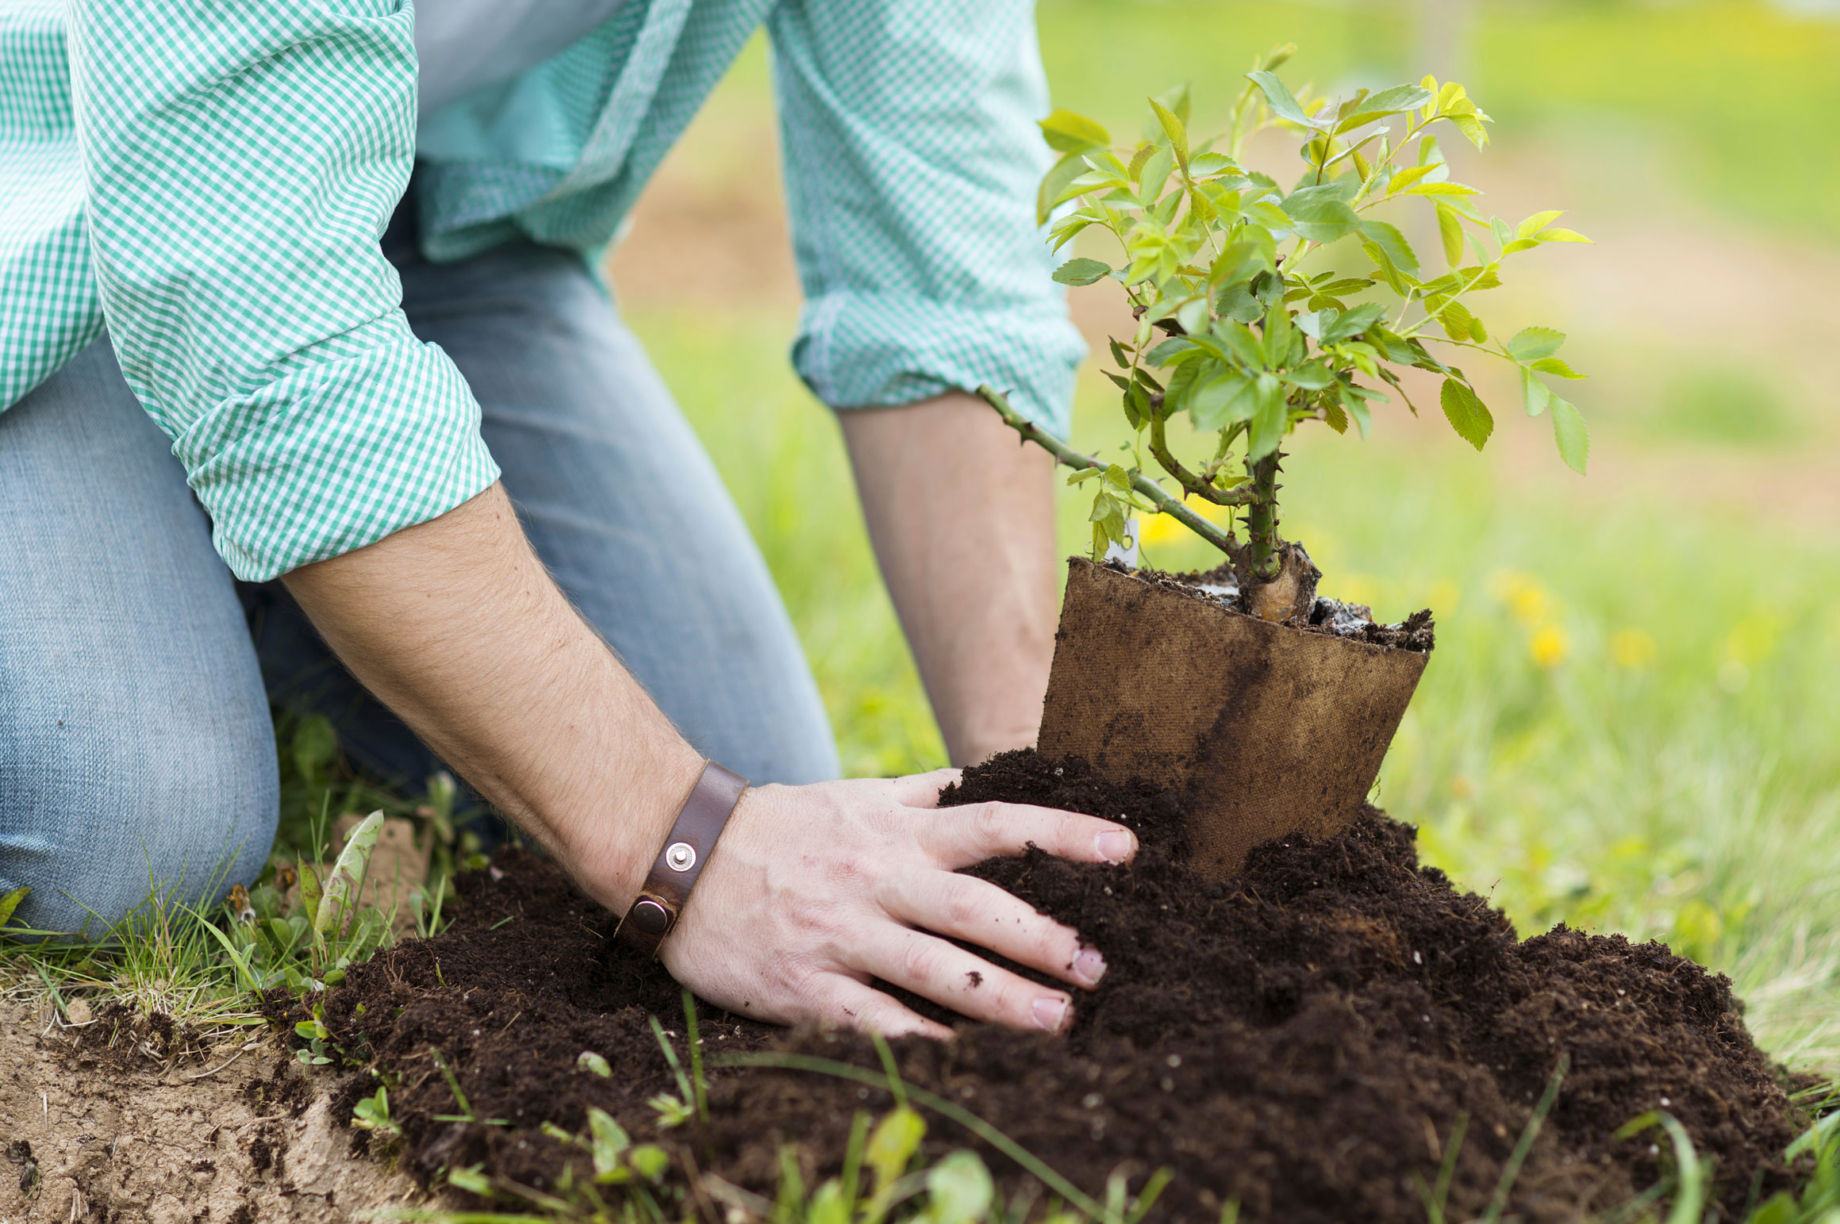 How To Make Money By Planting Trees